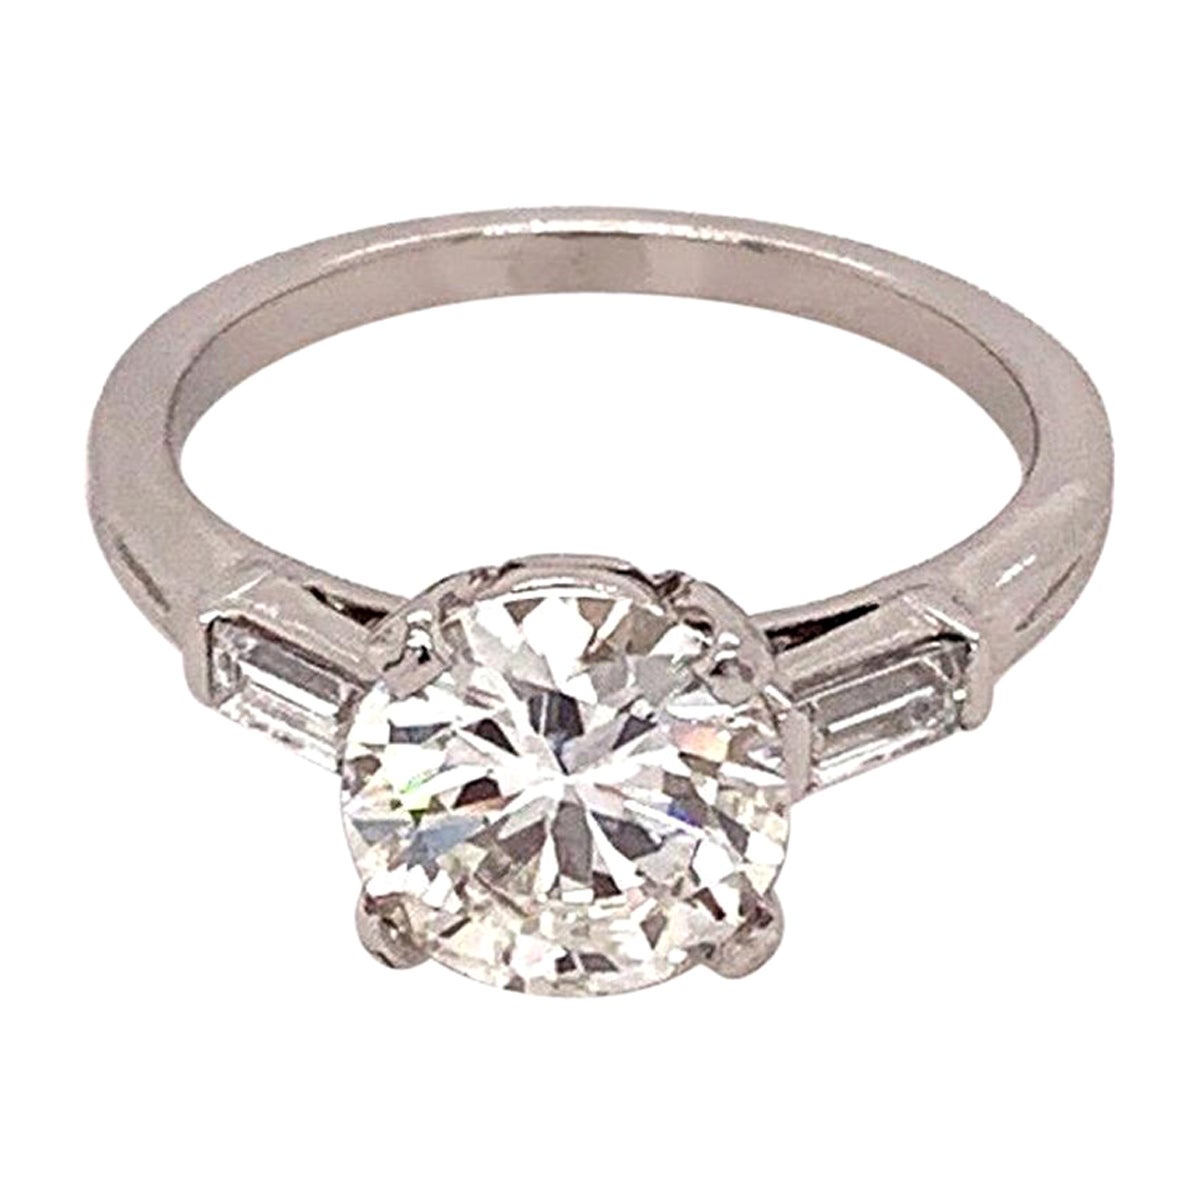 Vintage Tiffany & Co. Round Diamond 1.72 Carat Engagement Ring GIA H VS2 For Sale